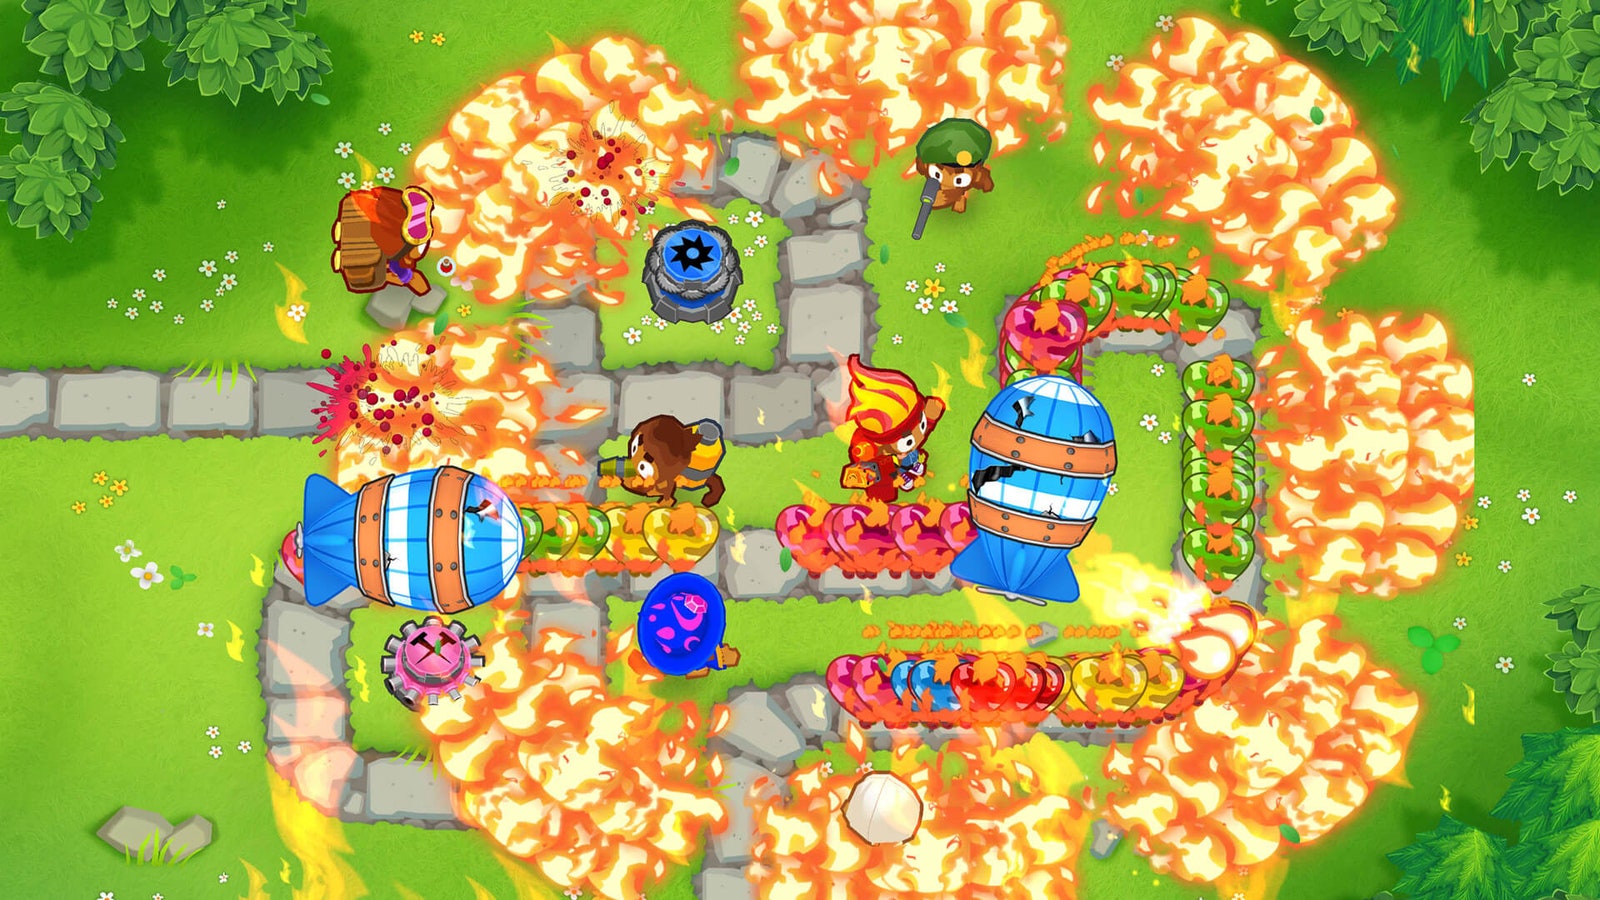 Bloons TD 6' Might Be the Best $5 I've Ever Spent